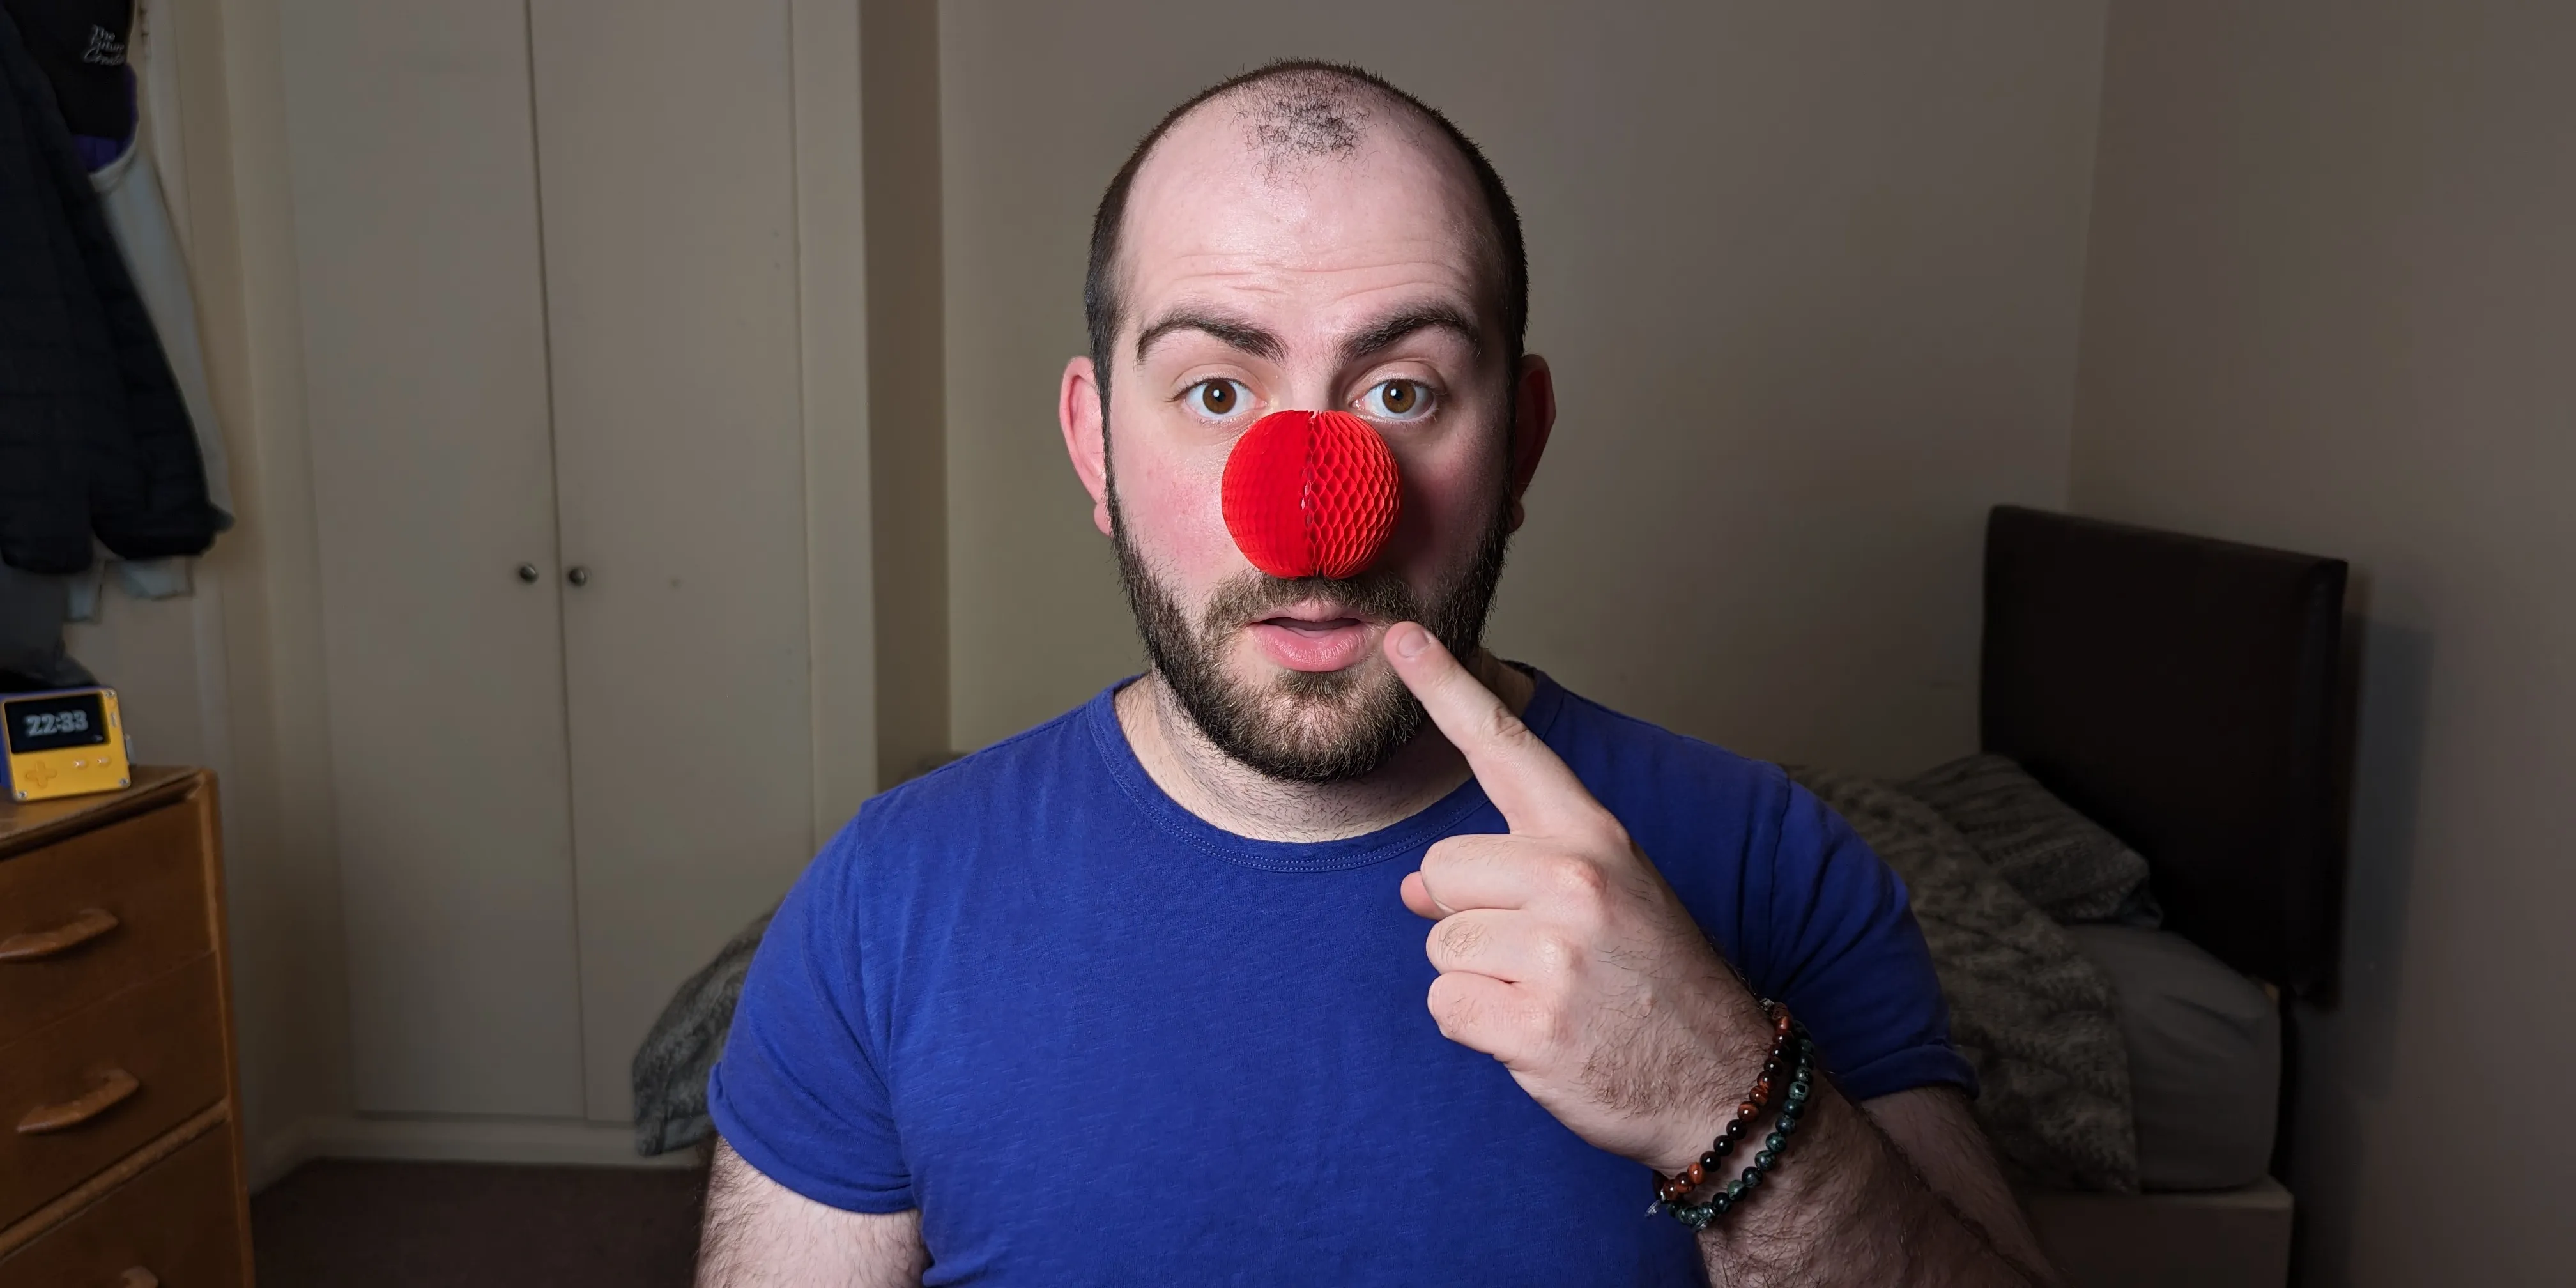 A picture of George wearing a red nose whilst pointing to it with a surprised expression on his face.